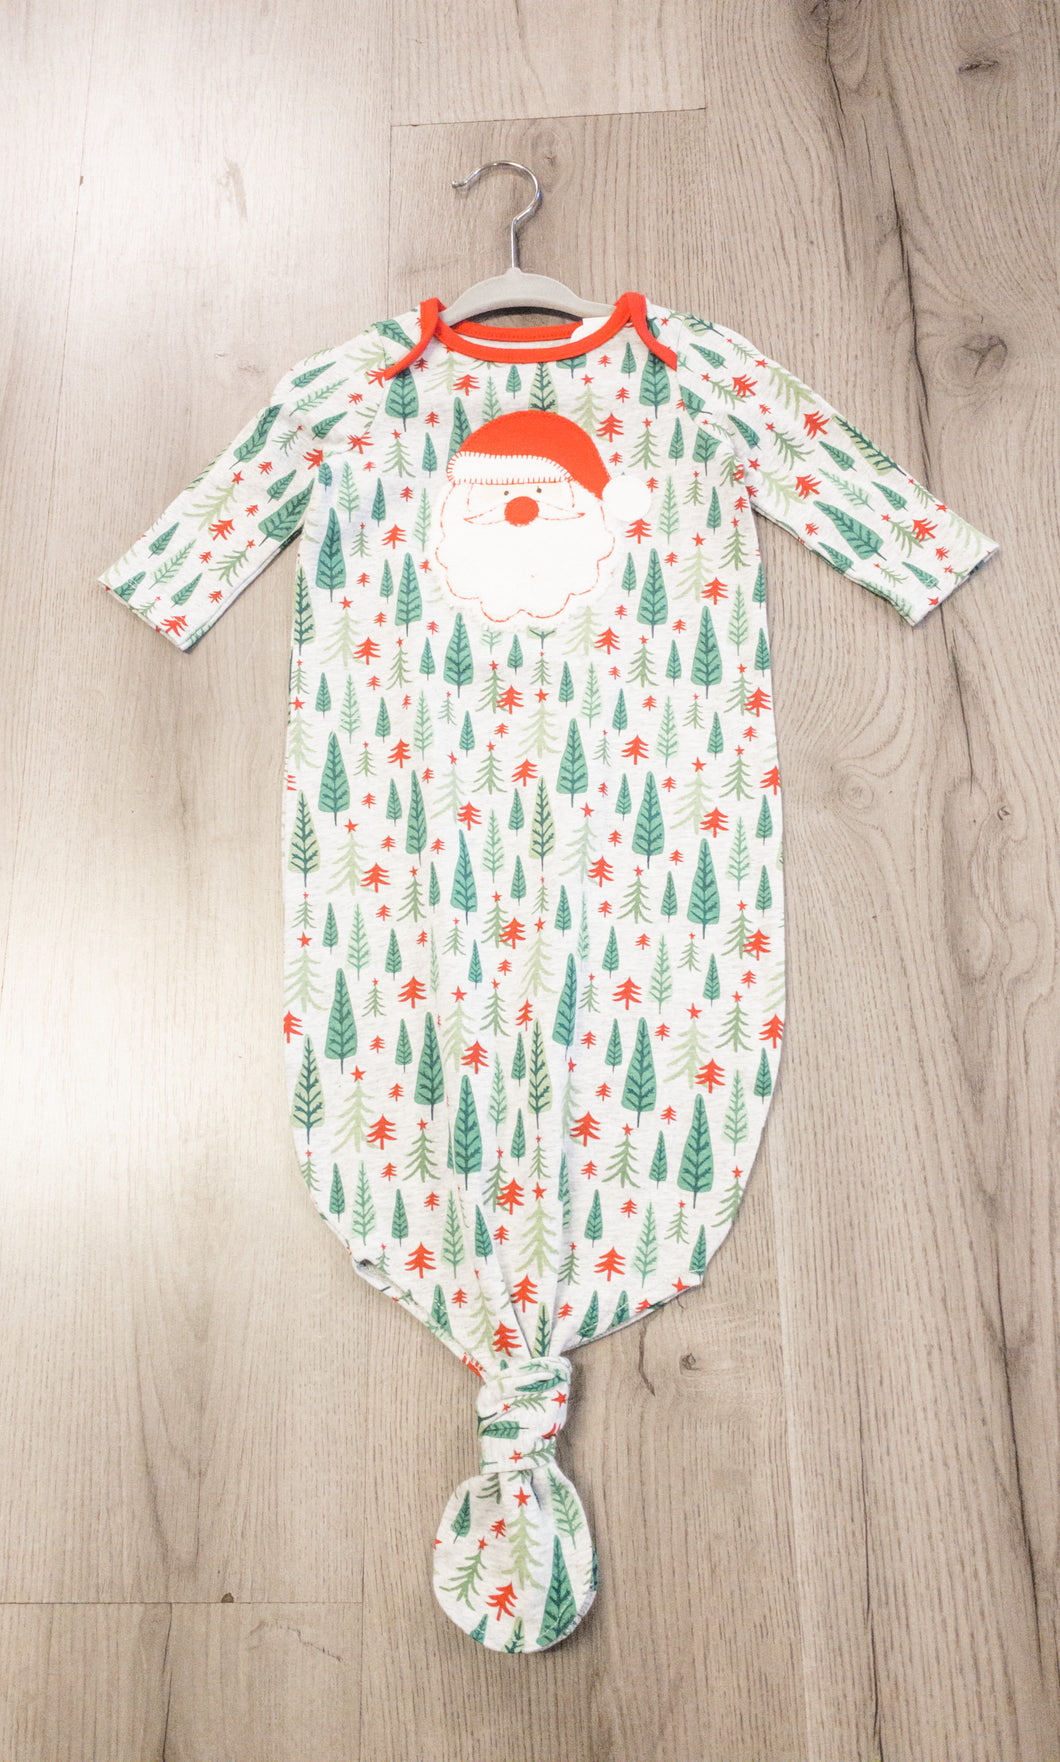 BABY FAMILY PJ GOWN (0-3 MONTHS)